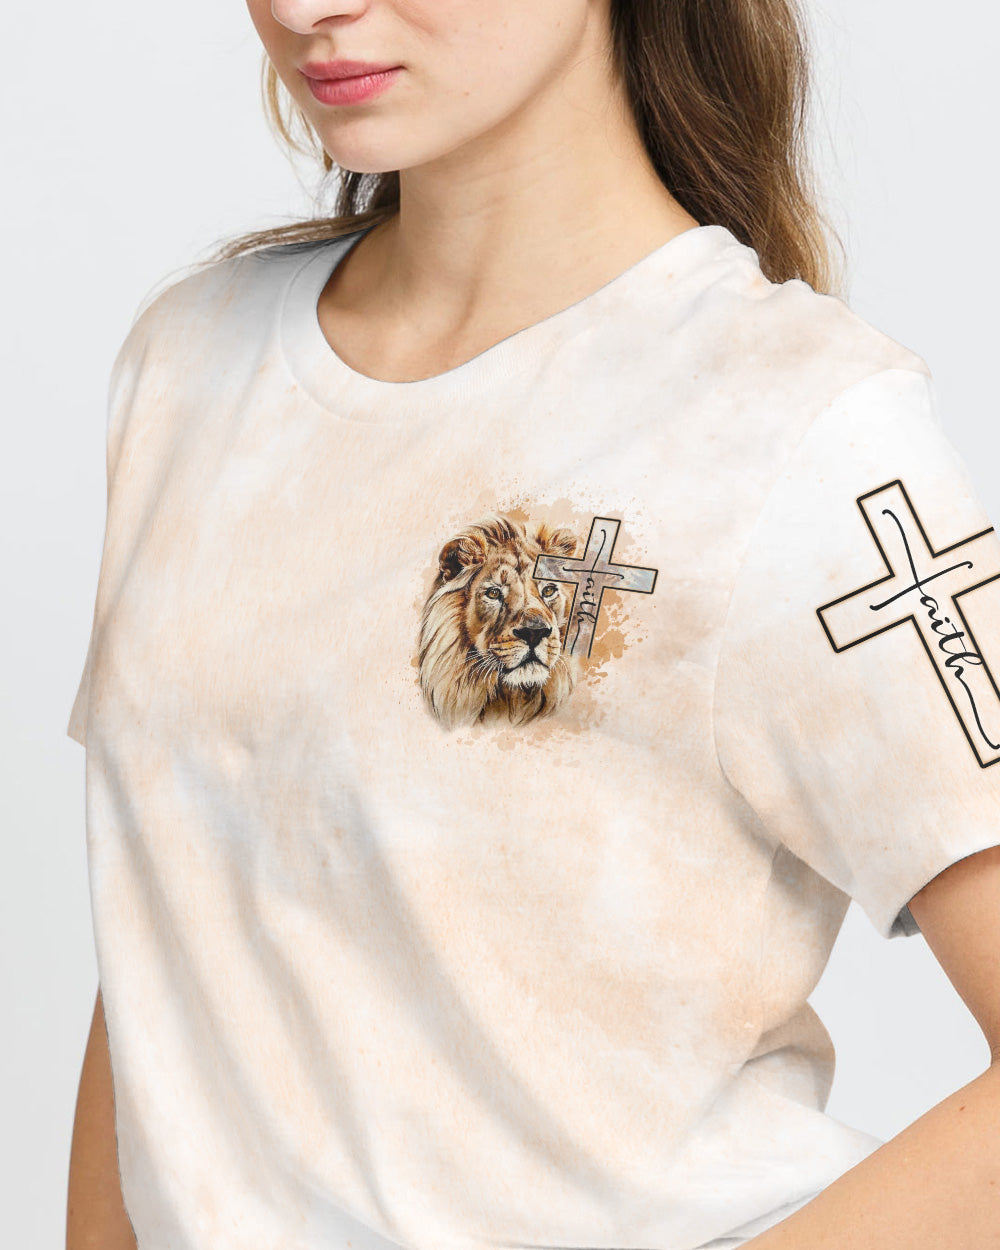 I Would Rather Stand With God Painting Lion Women's Christian Tshirt